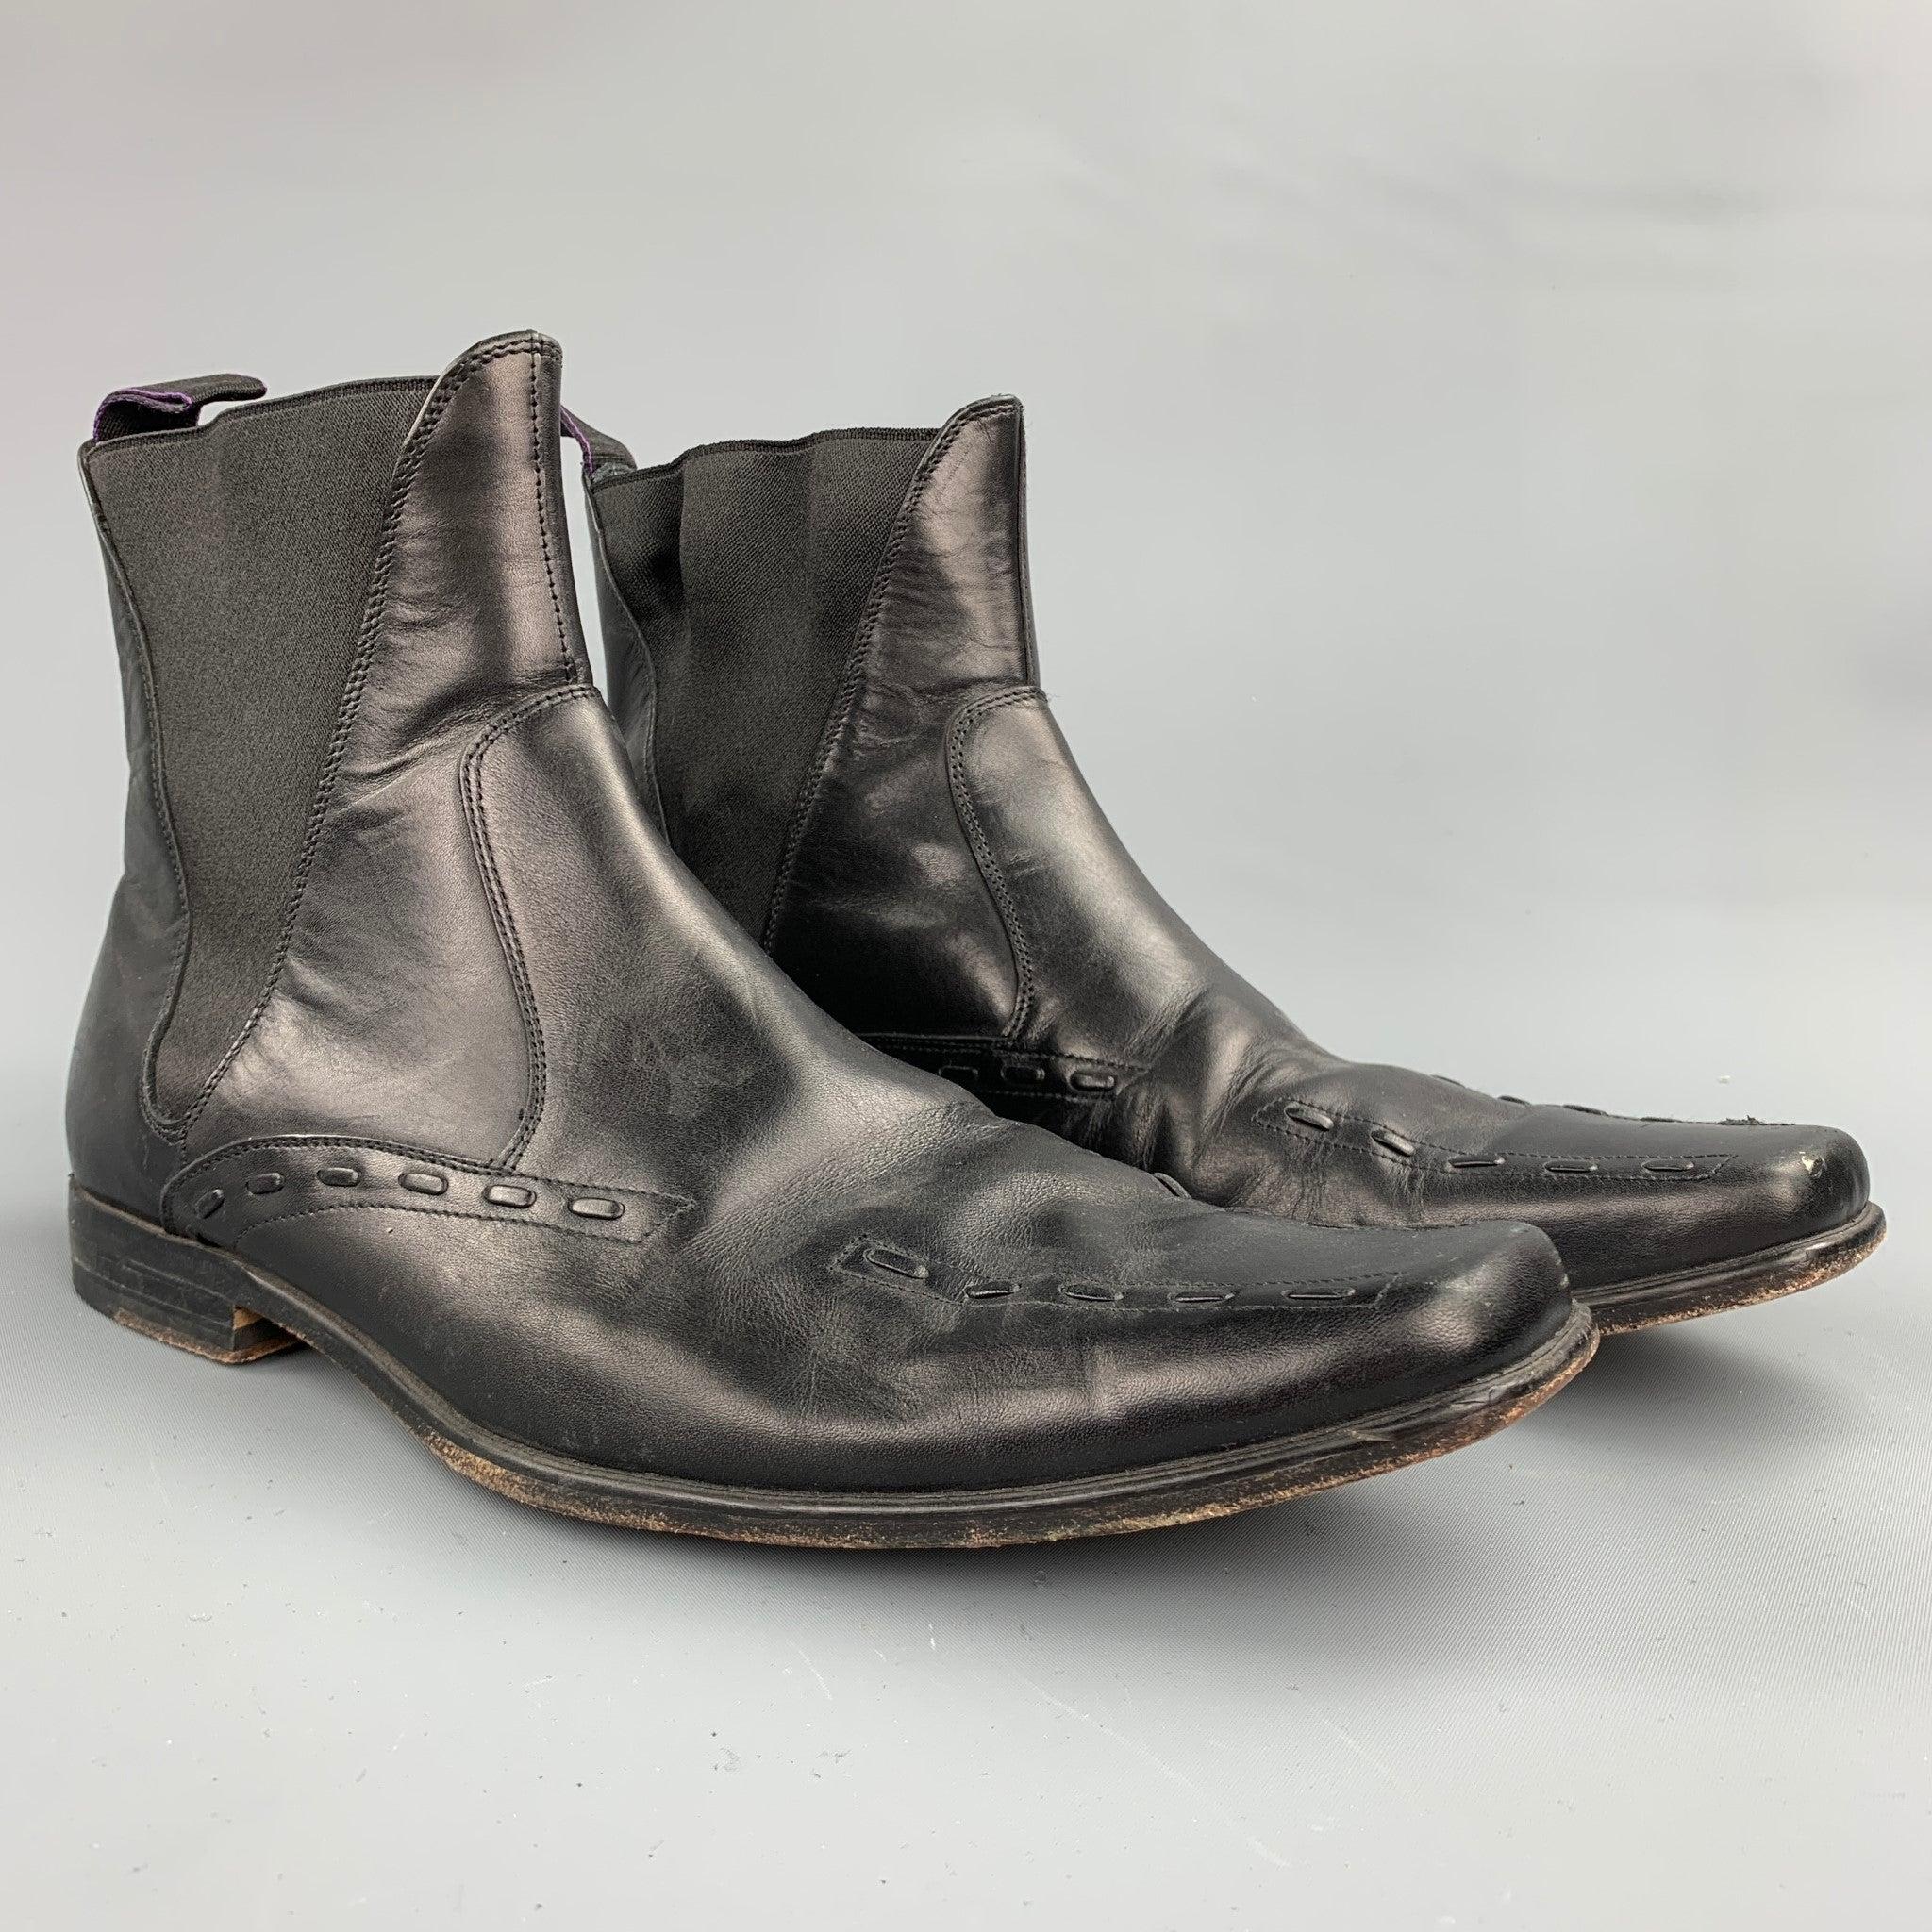 PAUL SMITH boots comes in a black leather with top stitching featuring a chelsea style, square toe, and a wooden sole. Minor wear.Good
Pre-Owned Condition. 

Marked:   43 B
 

Measurements: 
  
Width: 4 inches 
Length: 12.5 inches 
Height: 6.5